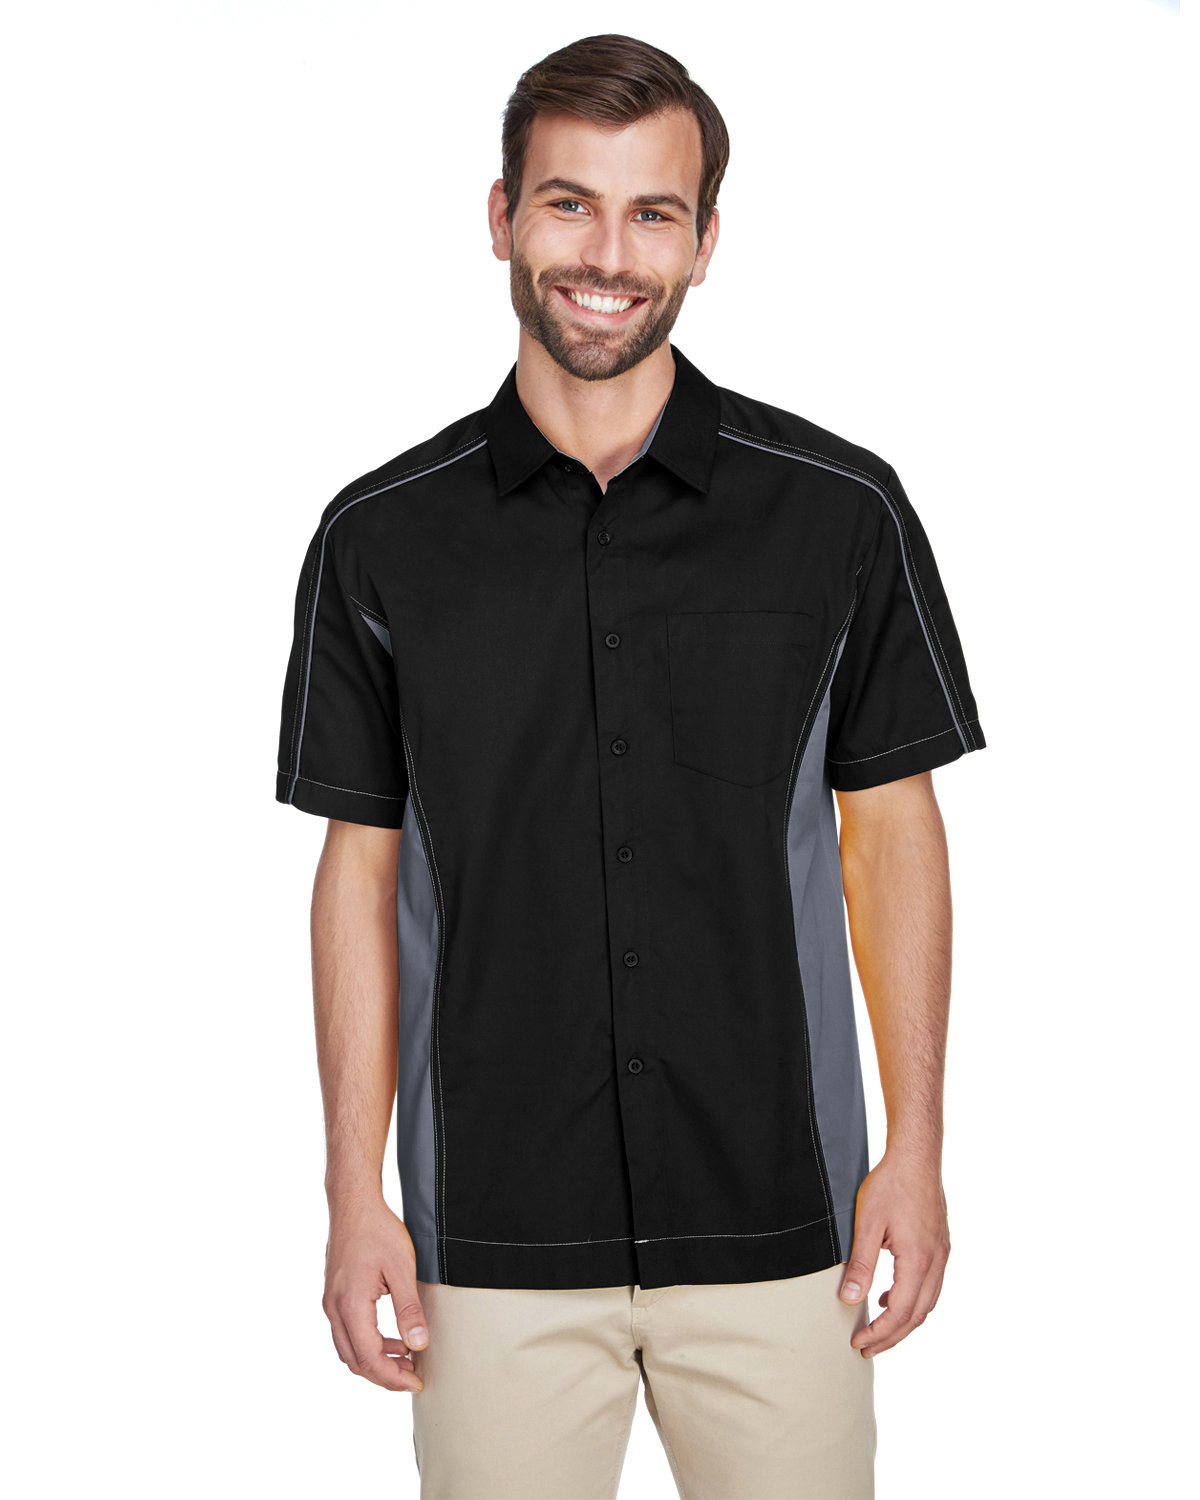 North End 87042T - Men's Tall Fuse Colorblock Twill Shirt